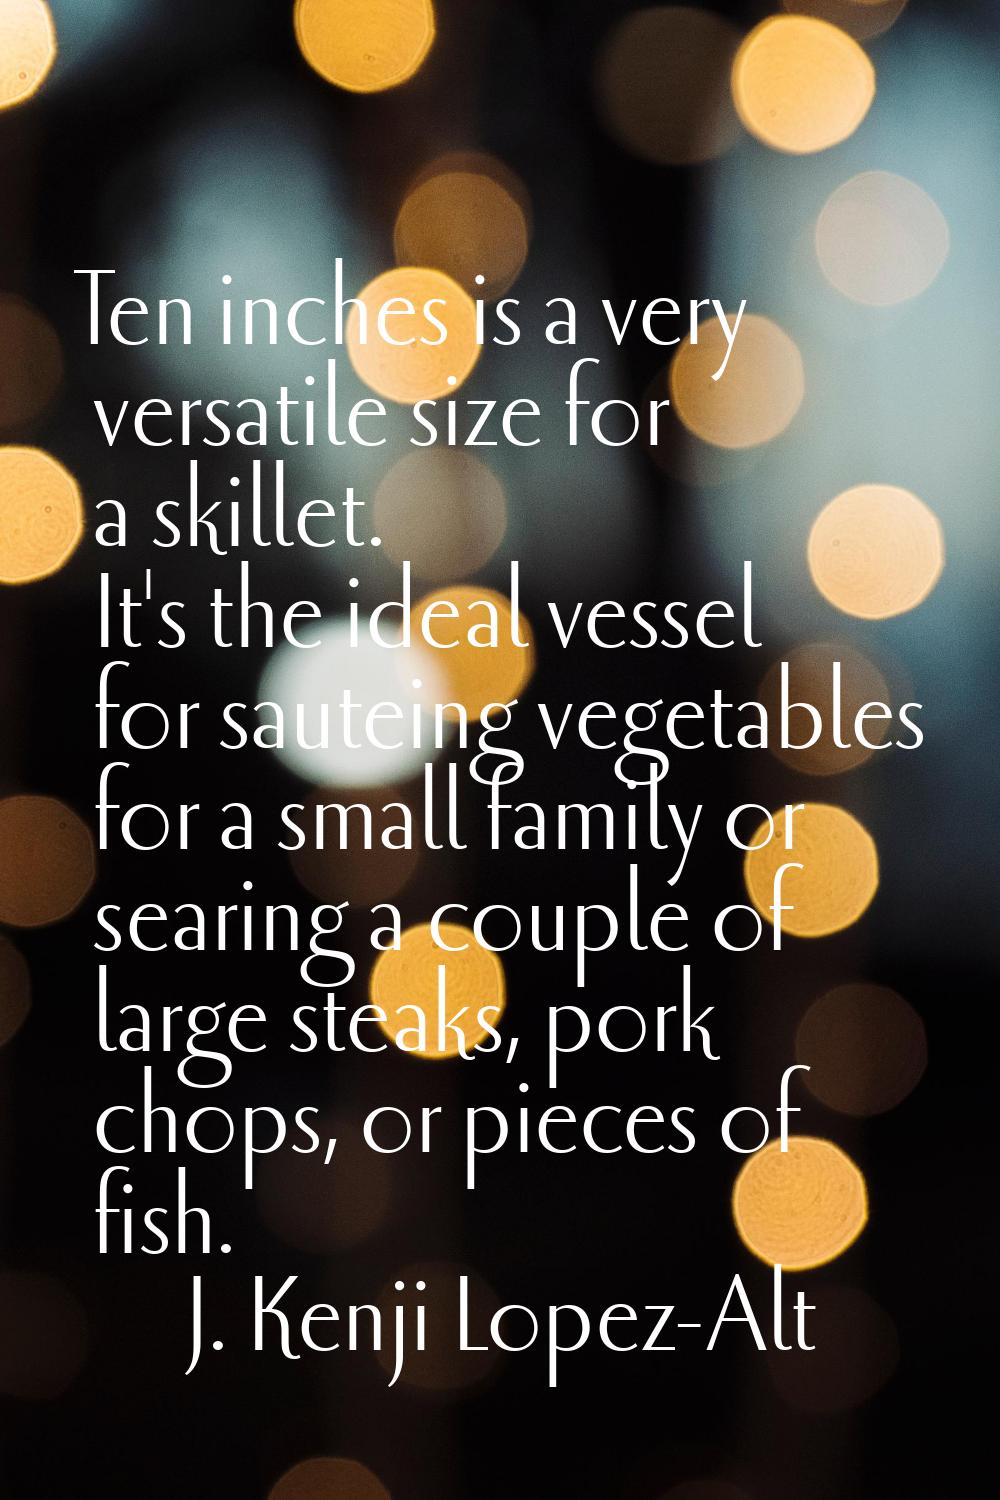 Ten inches is a very versatile size for a skillet. It's the ideal vessel for sauteing vegetables fo